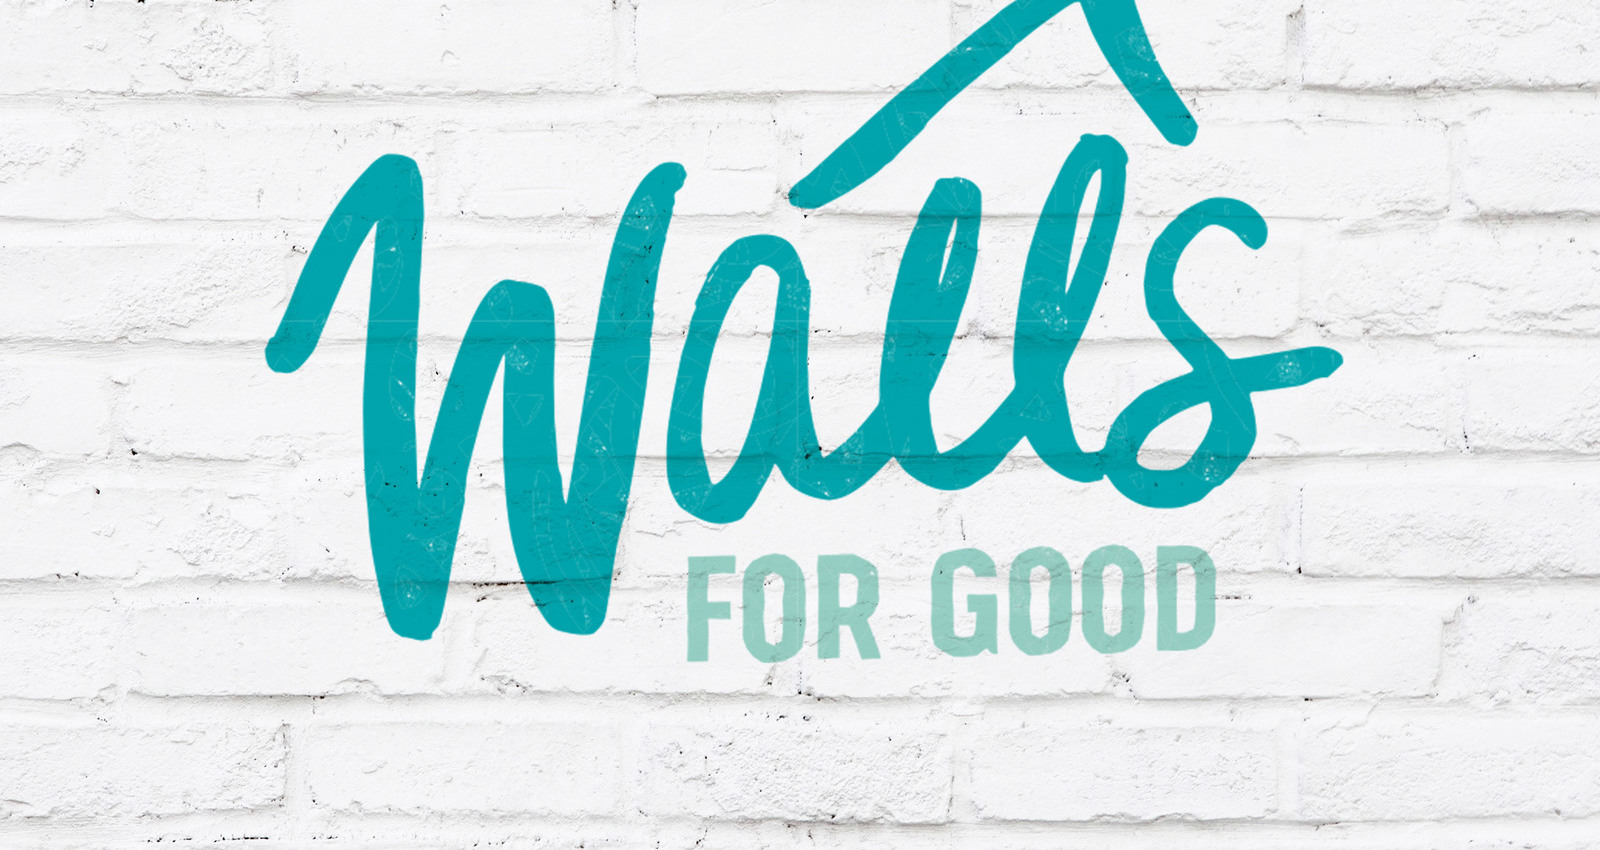 Walls for Good